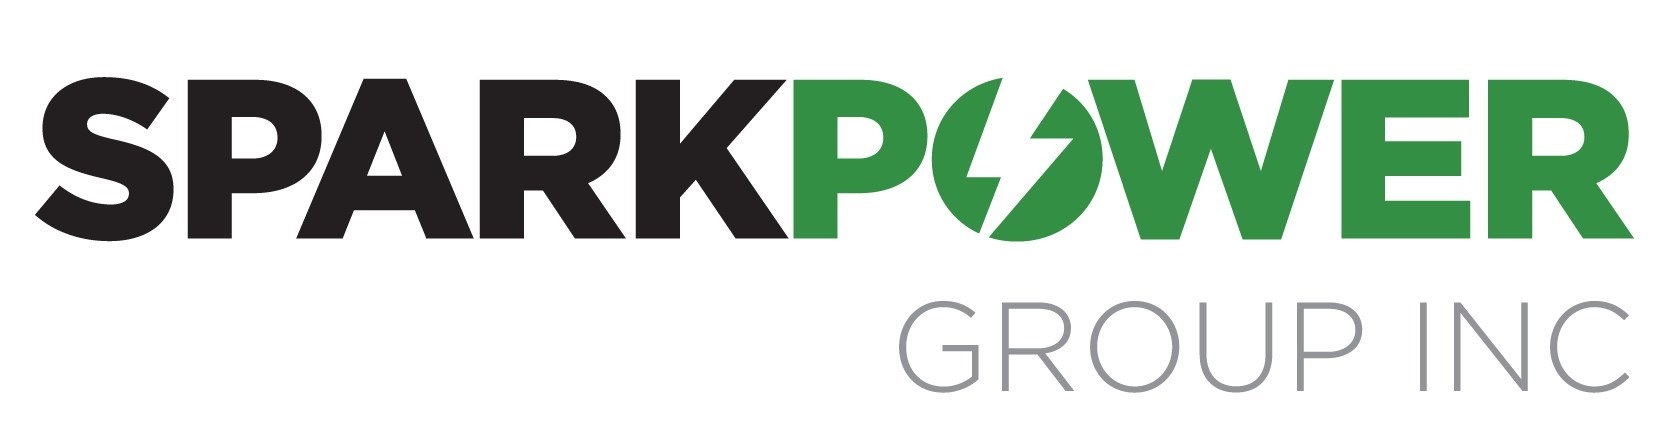 Spark Power Group Inc., Thursday, May 26, 2022, Press release picture